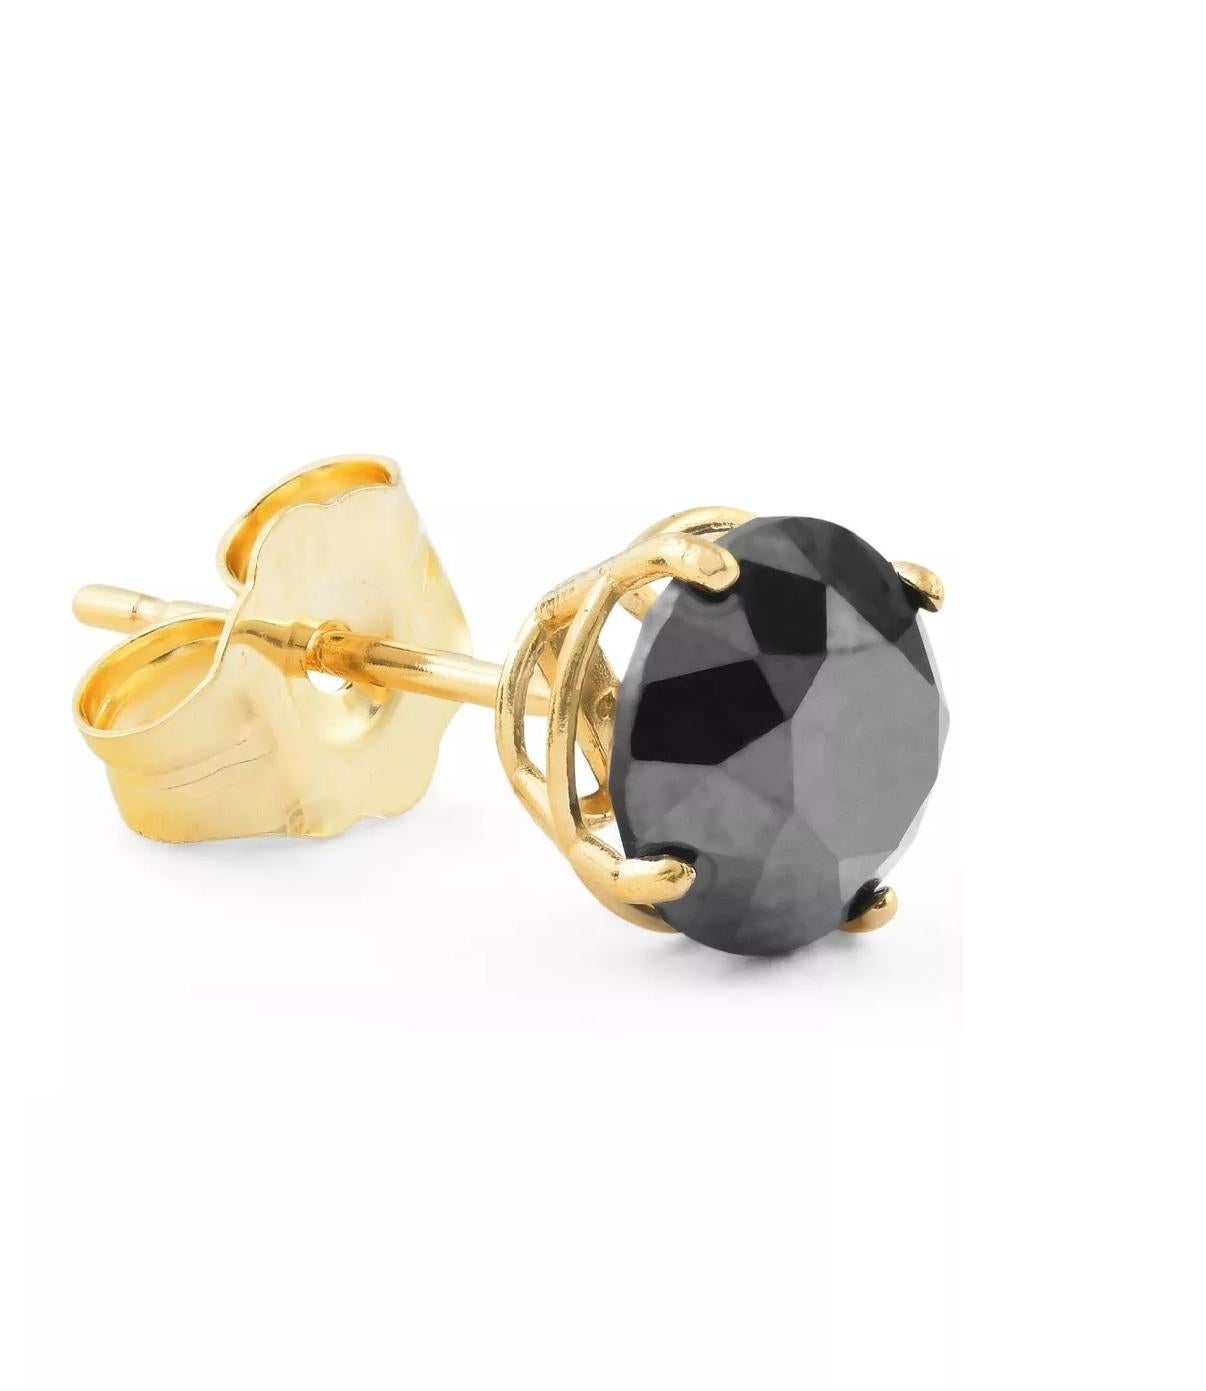 Contemporary 1.58 Carat Round Black Diamond Single Stud Earring for Men in 14 K Yellow Gold